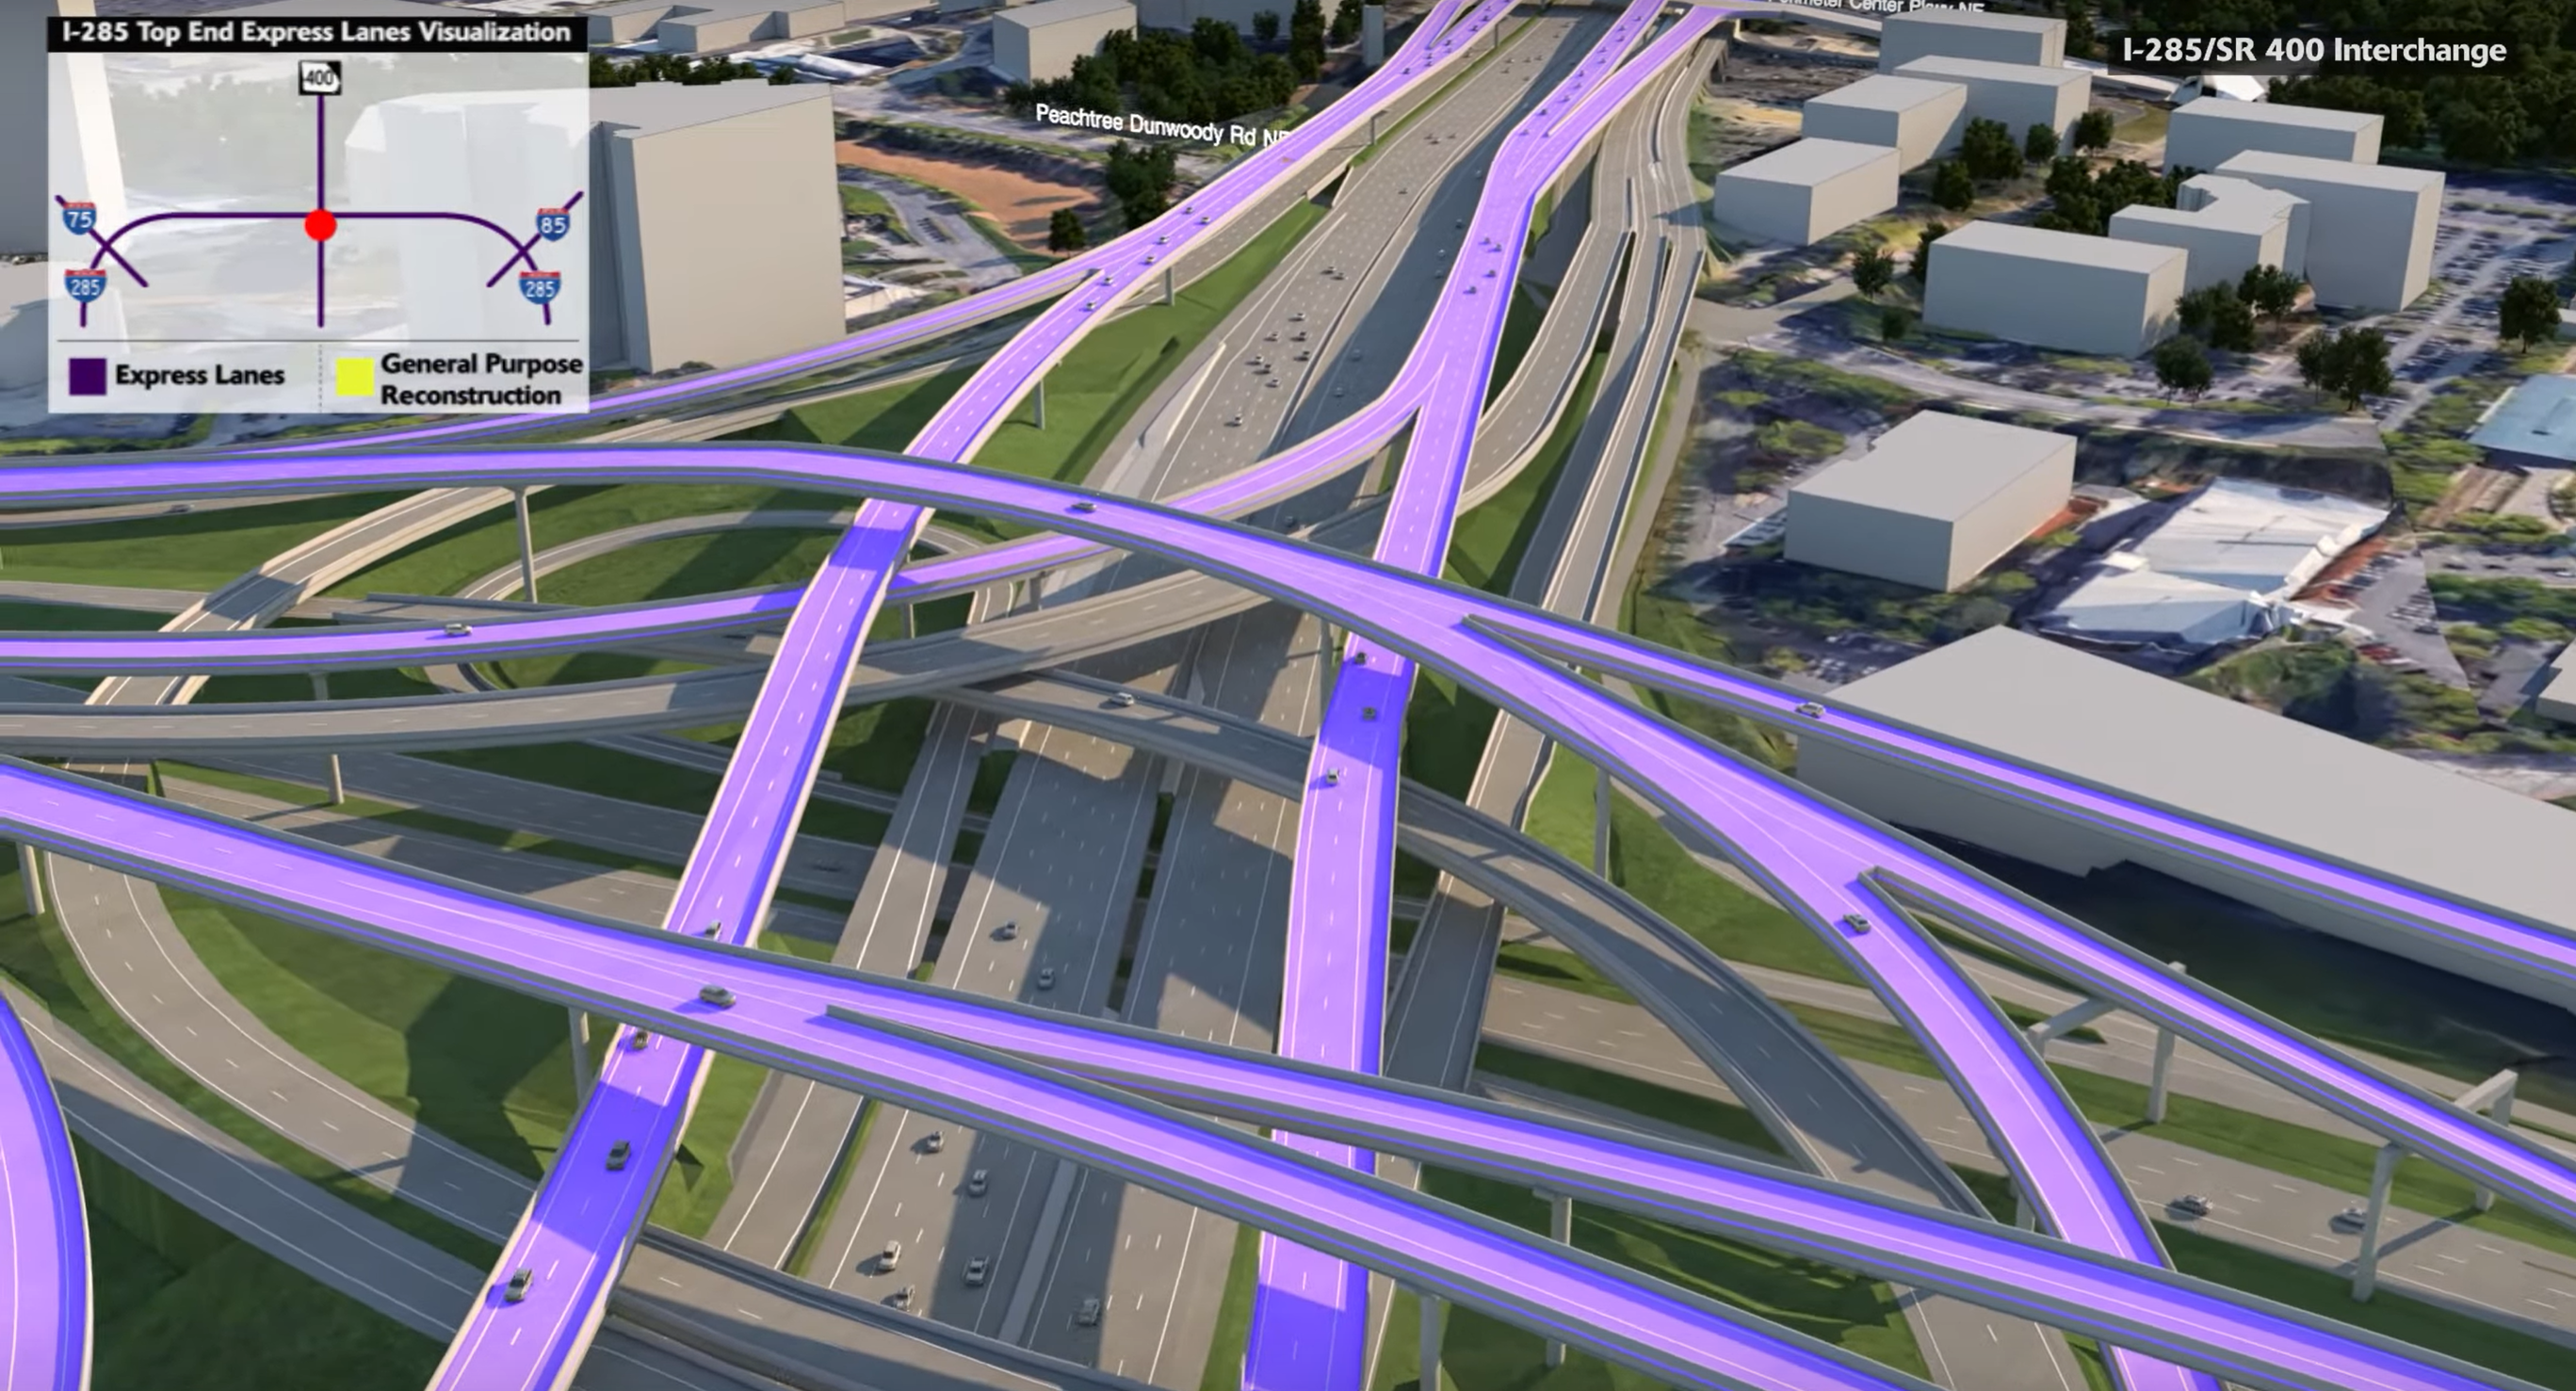 A rendering shows in purple the new express lanes weaving through the existing infrastructure.